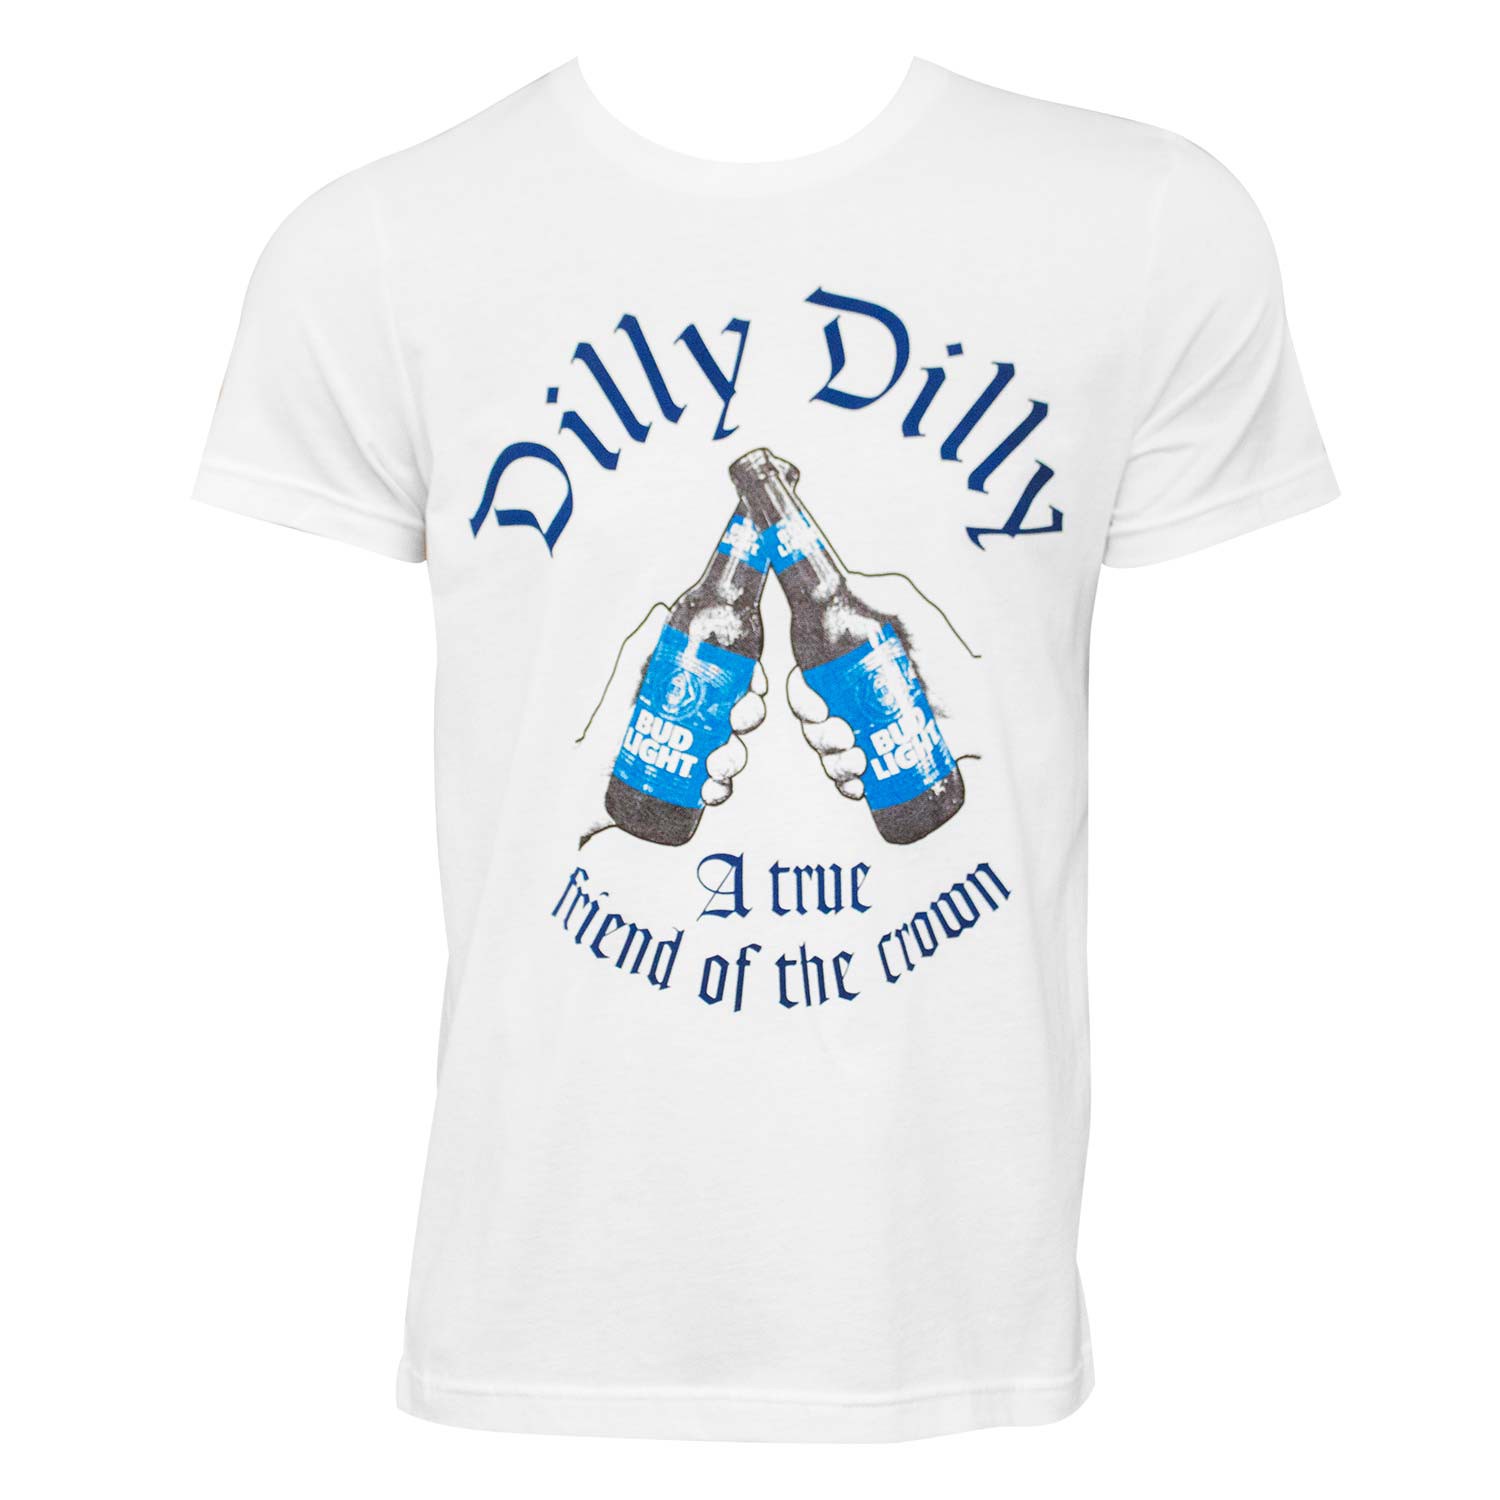 dilly dilly shirt bud light